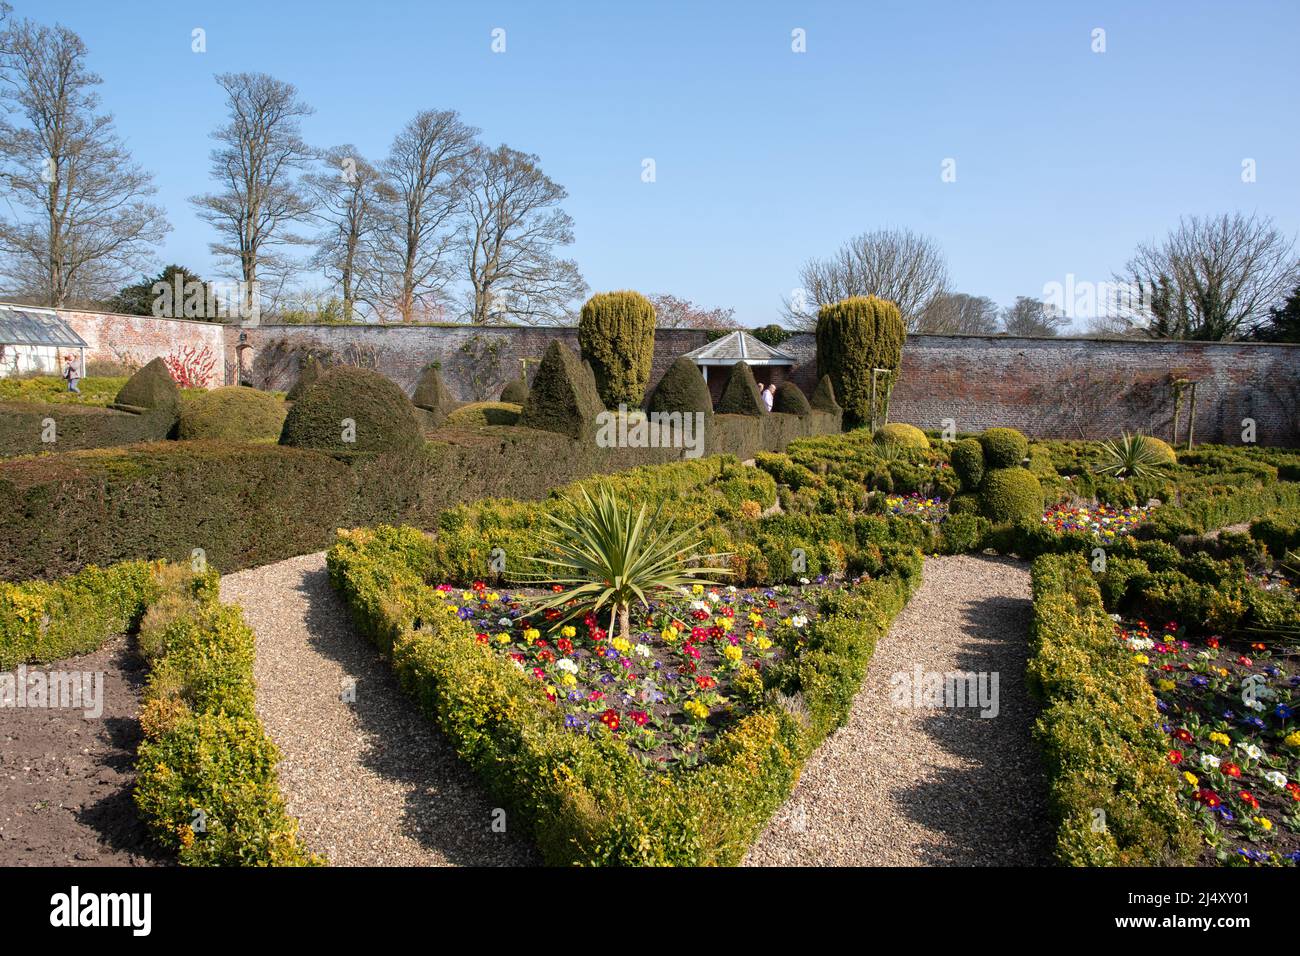 Sewerby Hall Walled Garden Stock Photo